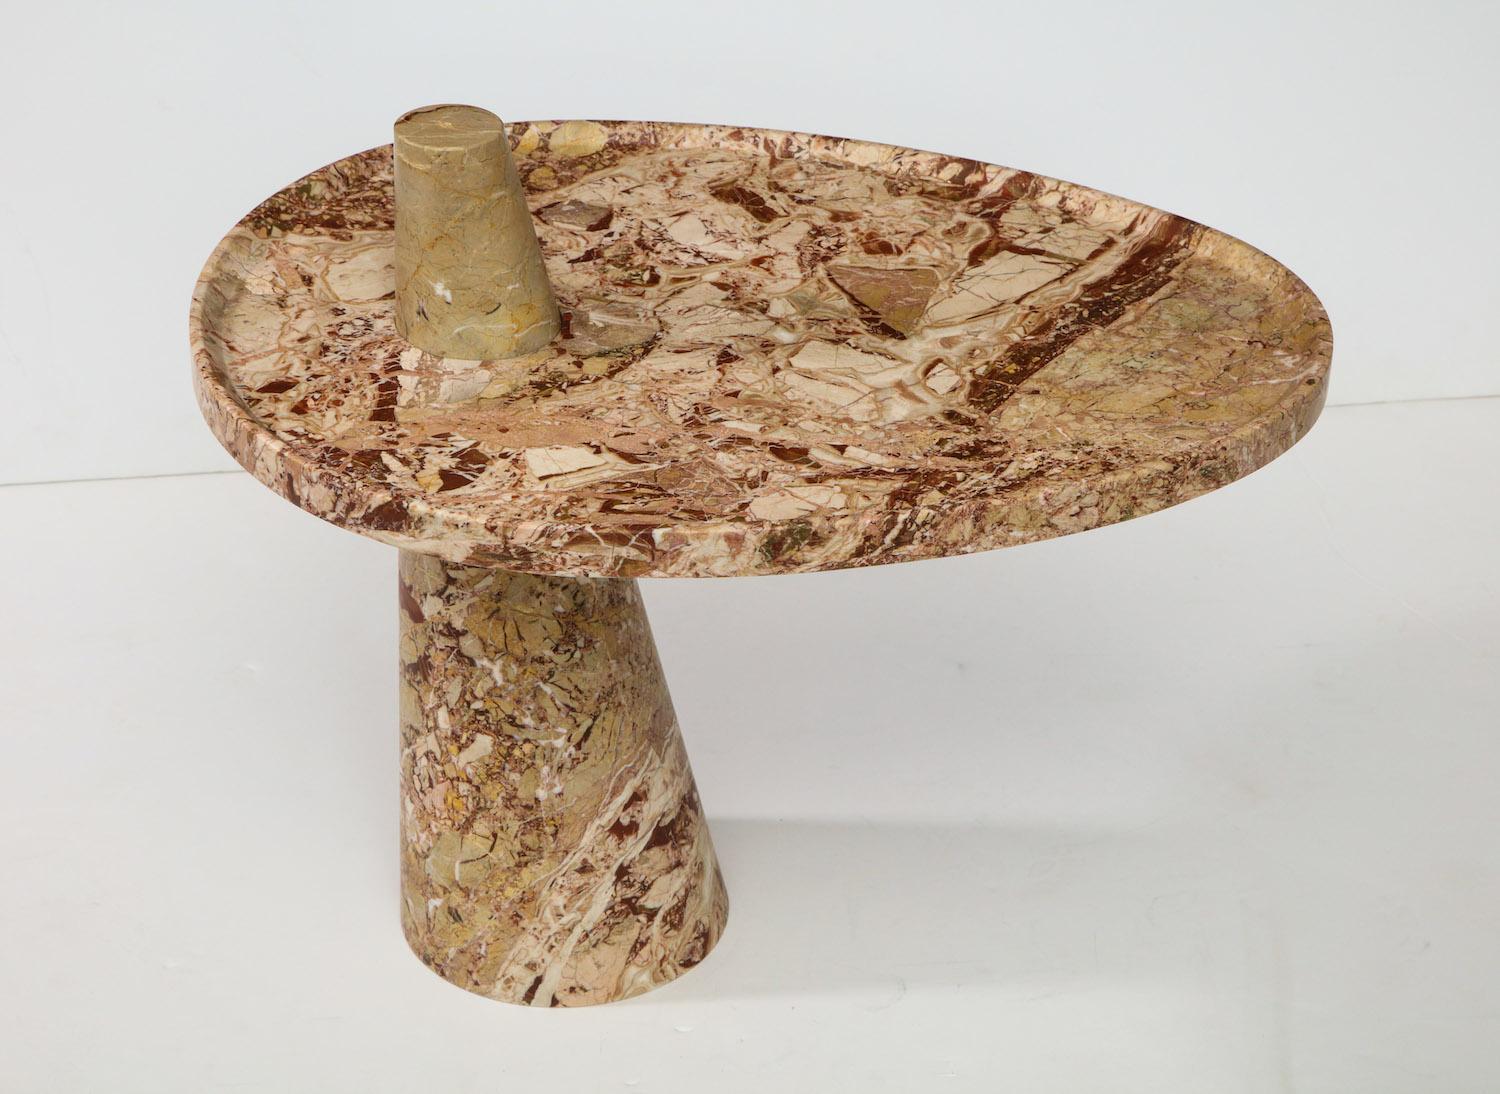 Solid cone base with removable carved tray that cantilevers. “Libeccio” refers to one of 8 winds that blow through Sicily. These tables will be made in a series of varied original designs, produced in Sicily using local artisans and local stones.